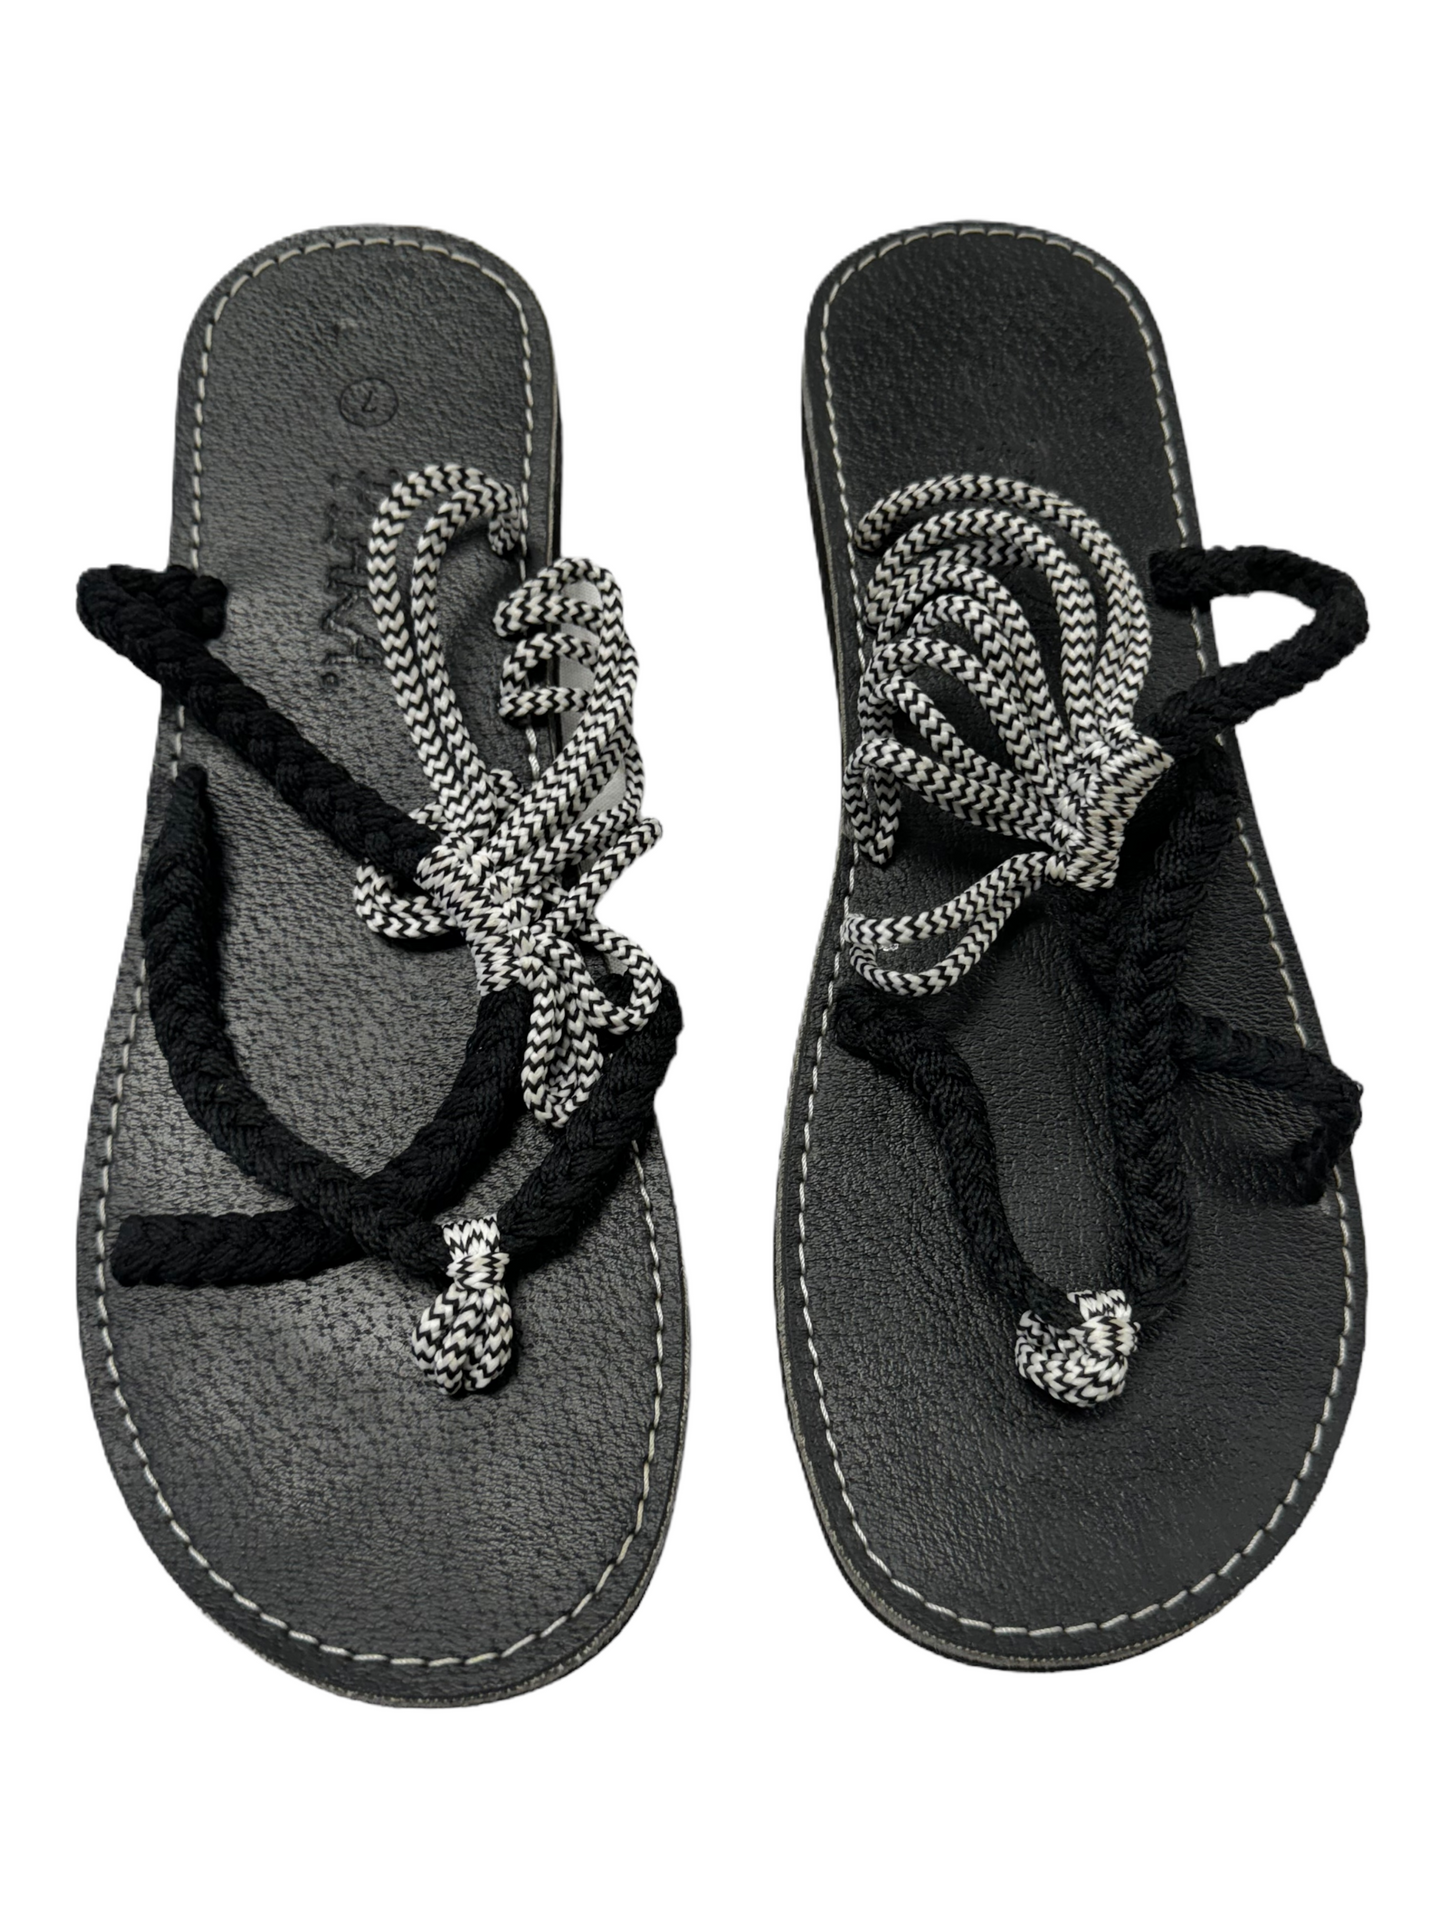 Sandals Flats By Plaka  Size: 7